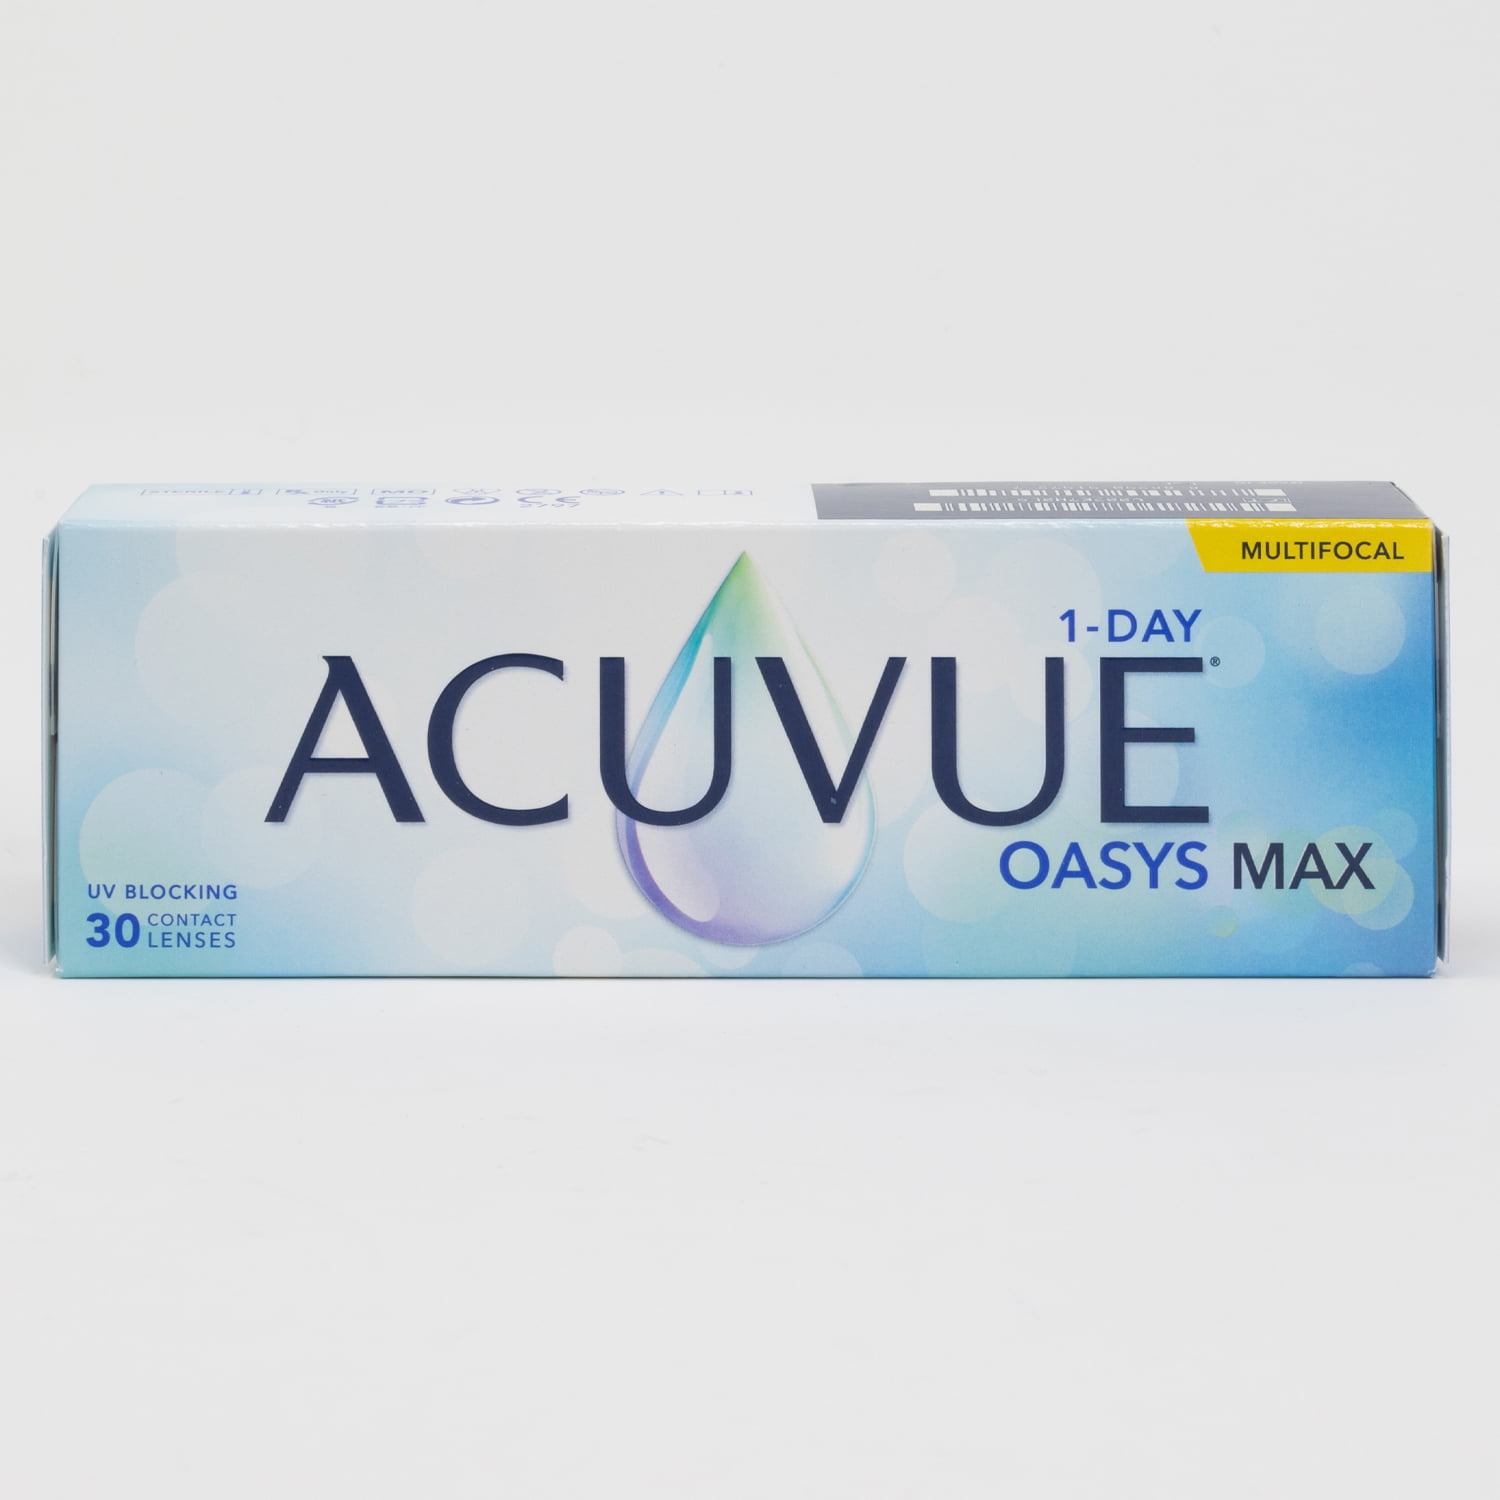 acuvue-oasys-max-1-day-multifocal-90-pack-contact-lenses-target